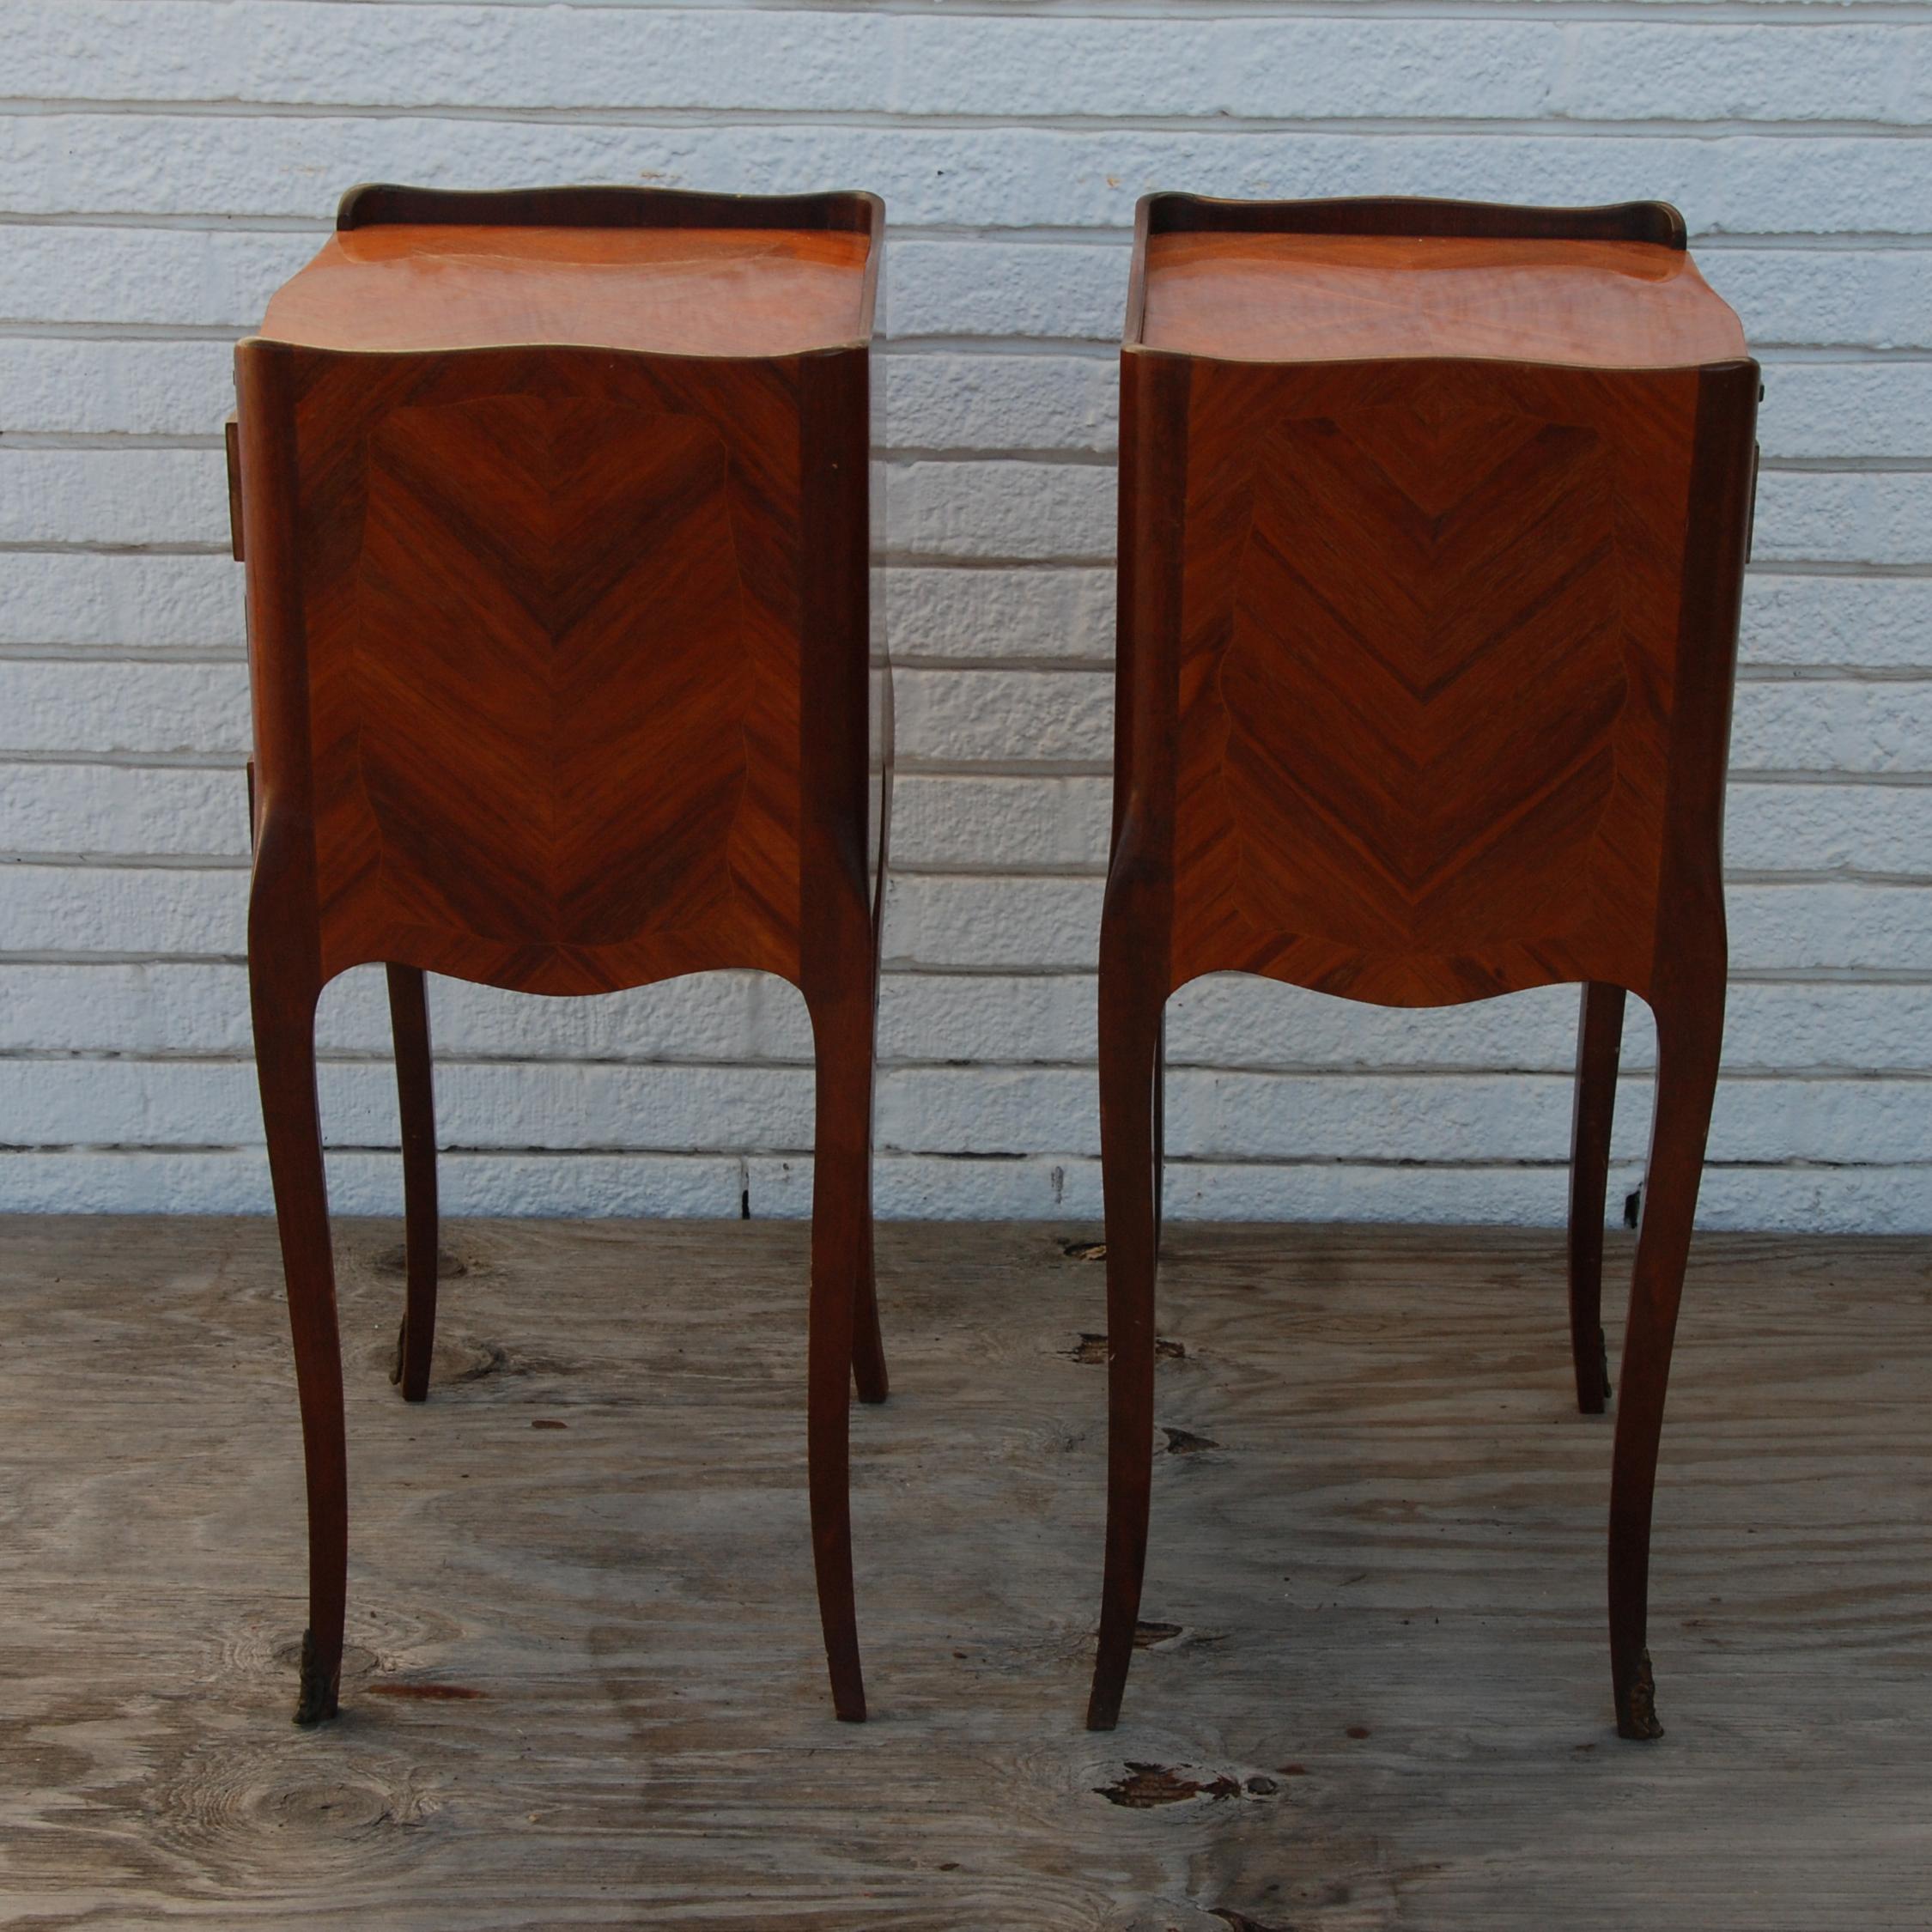 Pair of traditional mahogany nightstands with marquetry and Queen Anne legs

These nightstands feature marquetry inlay on front, with Queen Anne style 